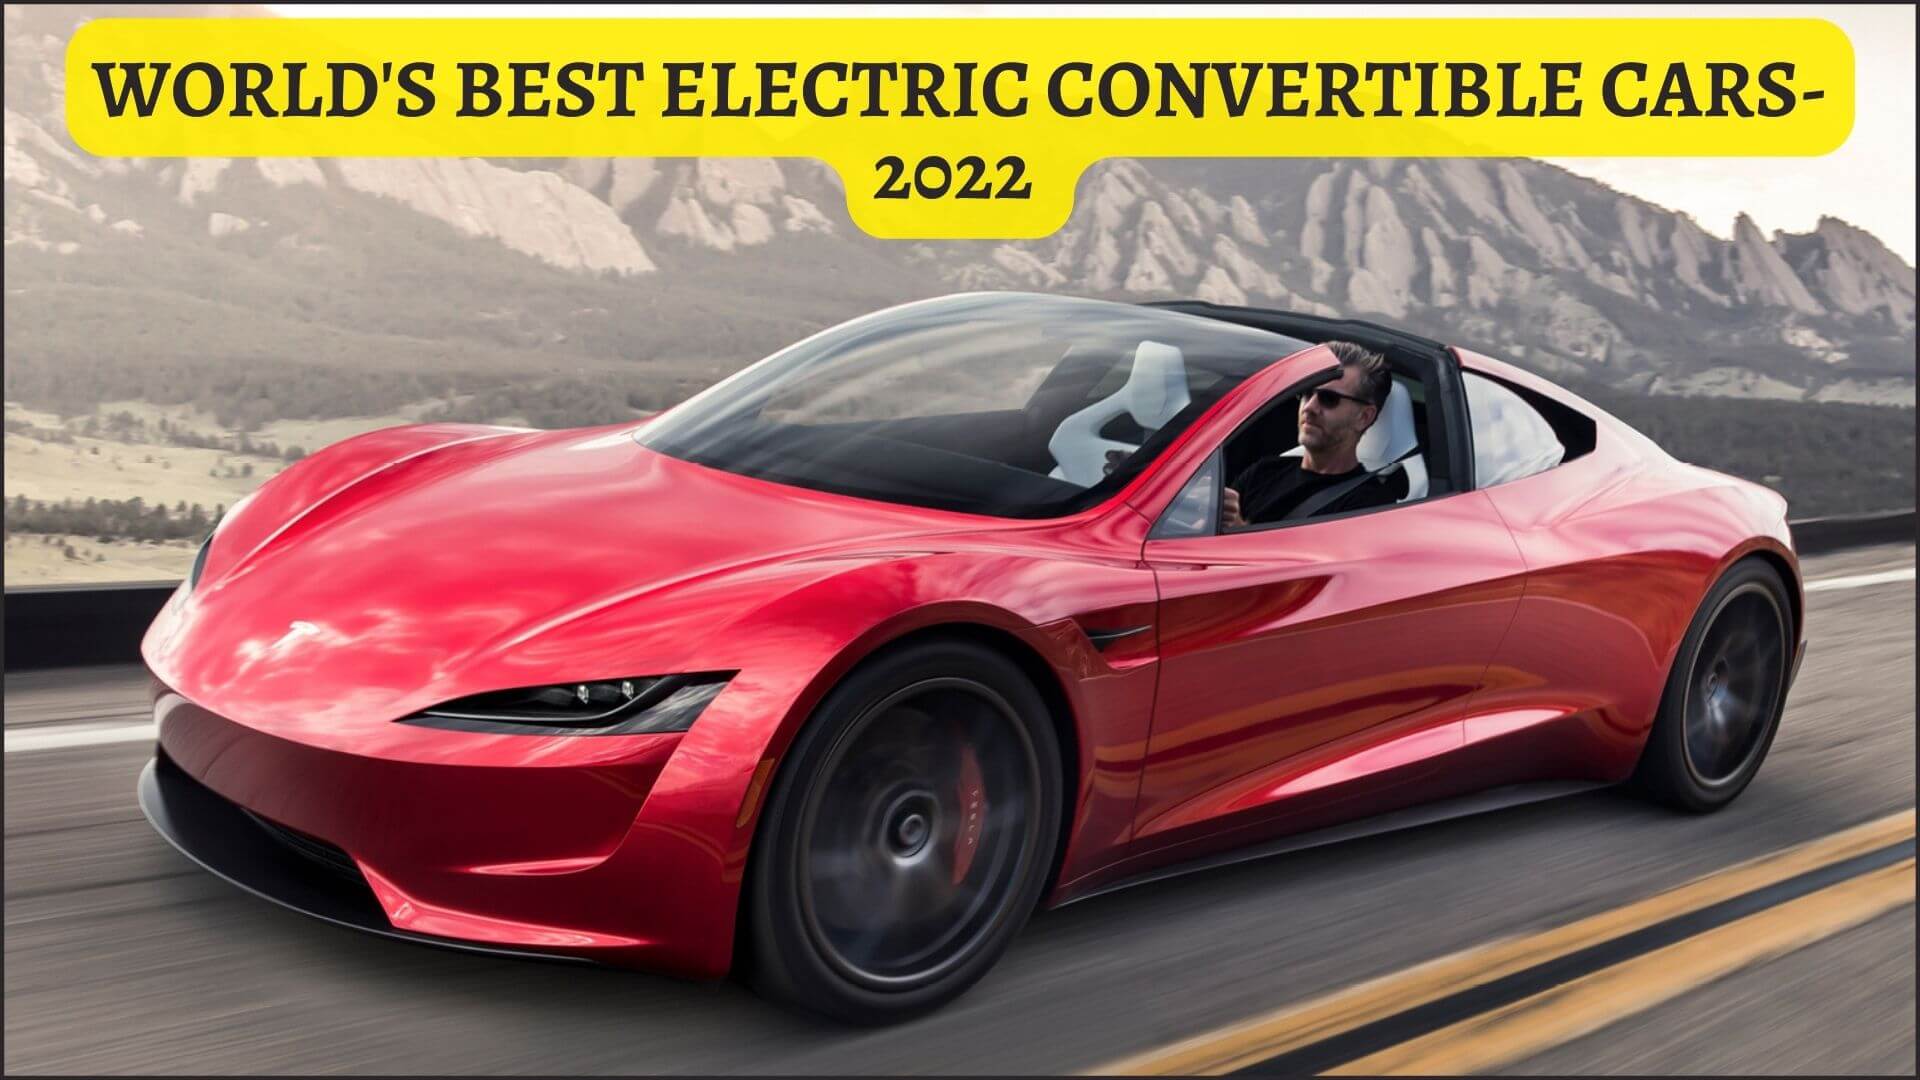 Worlds Top 5 Electric Convertible Cars- Best in 2022